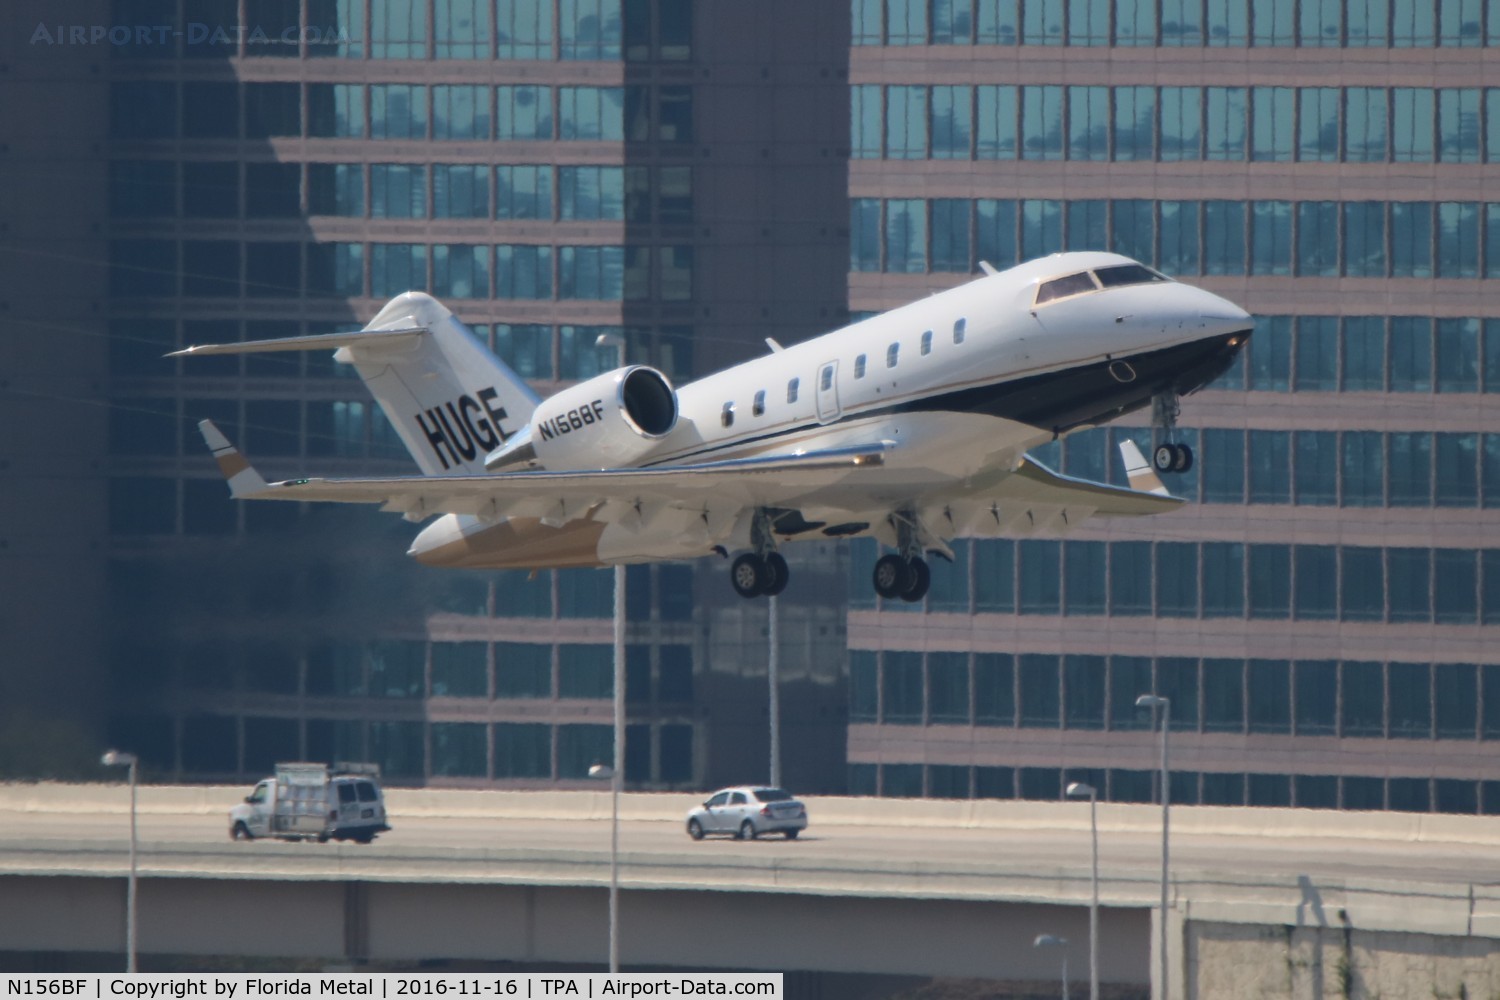 N156BF, 2012 Bombardier Challenger 605 (CL-600-2B16) C/N 5912, Challenger 605